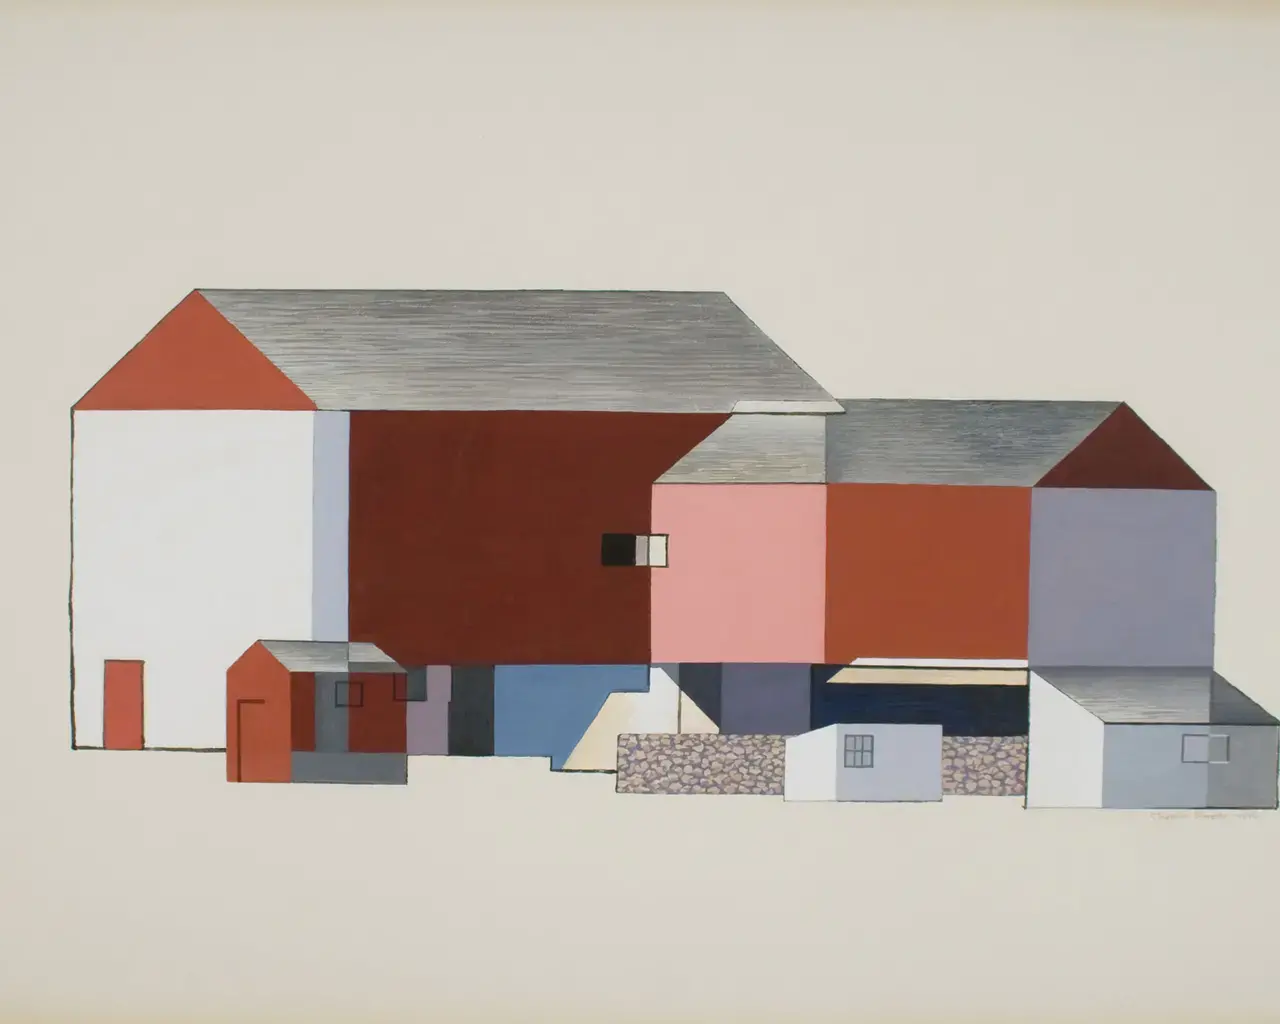 Charles Sheeler, Barn Abstraction, 1946, tempera on paperboard, 21 1/2 x 28 3/8 inches, collection of Joseph P. Carroll and Dr. Roberta Carroll. Photo courtesy of Forum Gallery.